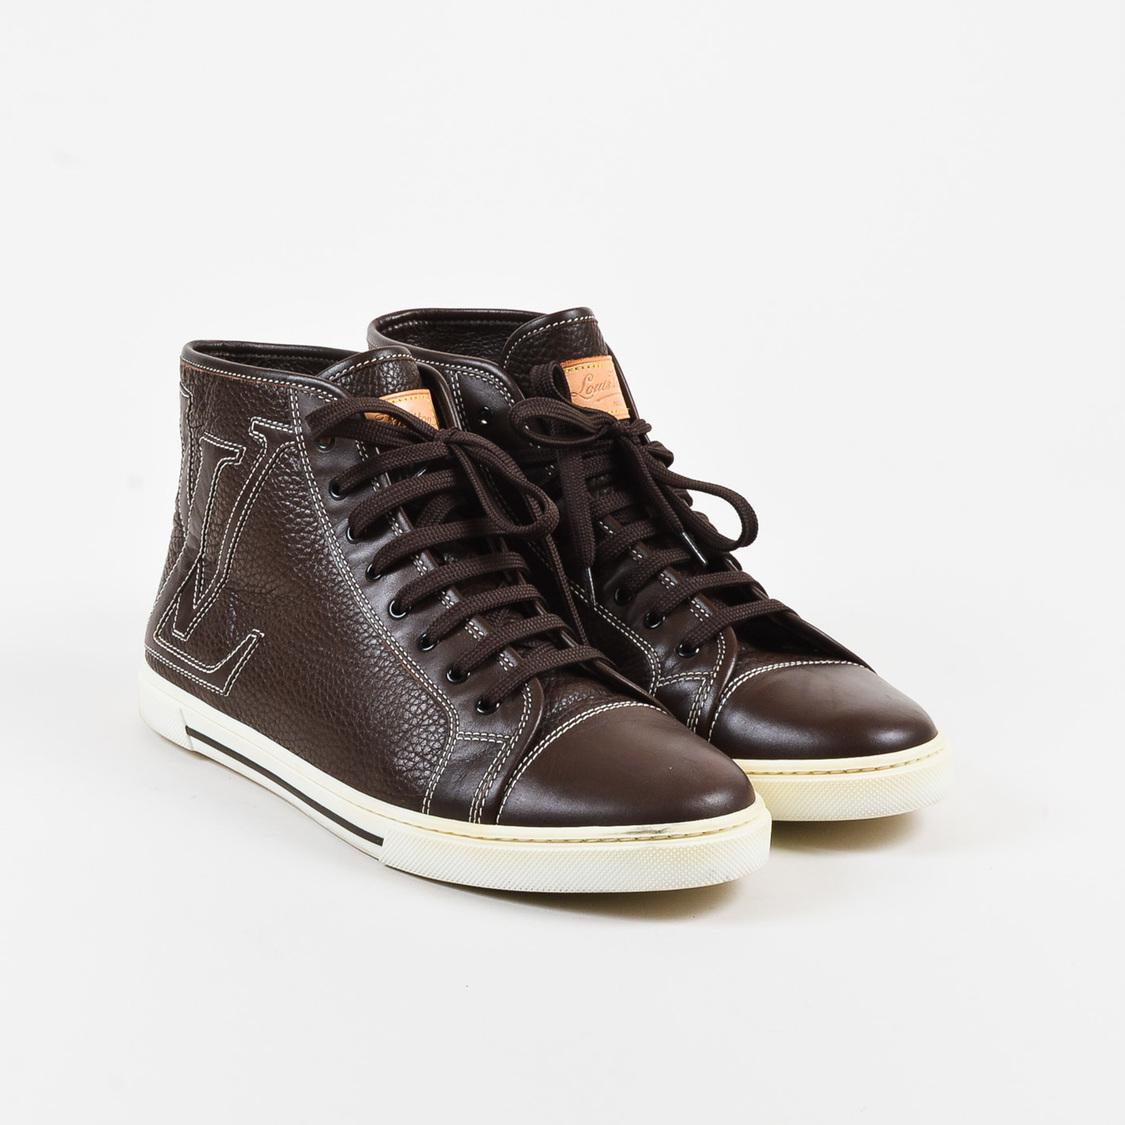 Lyst - Louis Vuitton Brown & White Leather &#39;lv&#39; Lace Up High Top Sneakers Sz 38.5 in Brown for Men